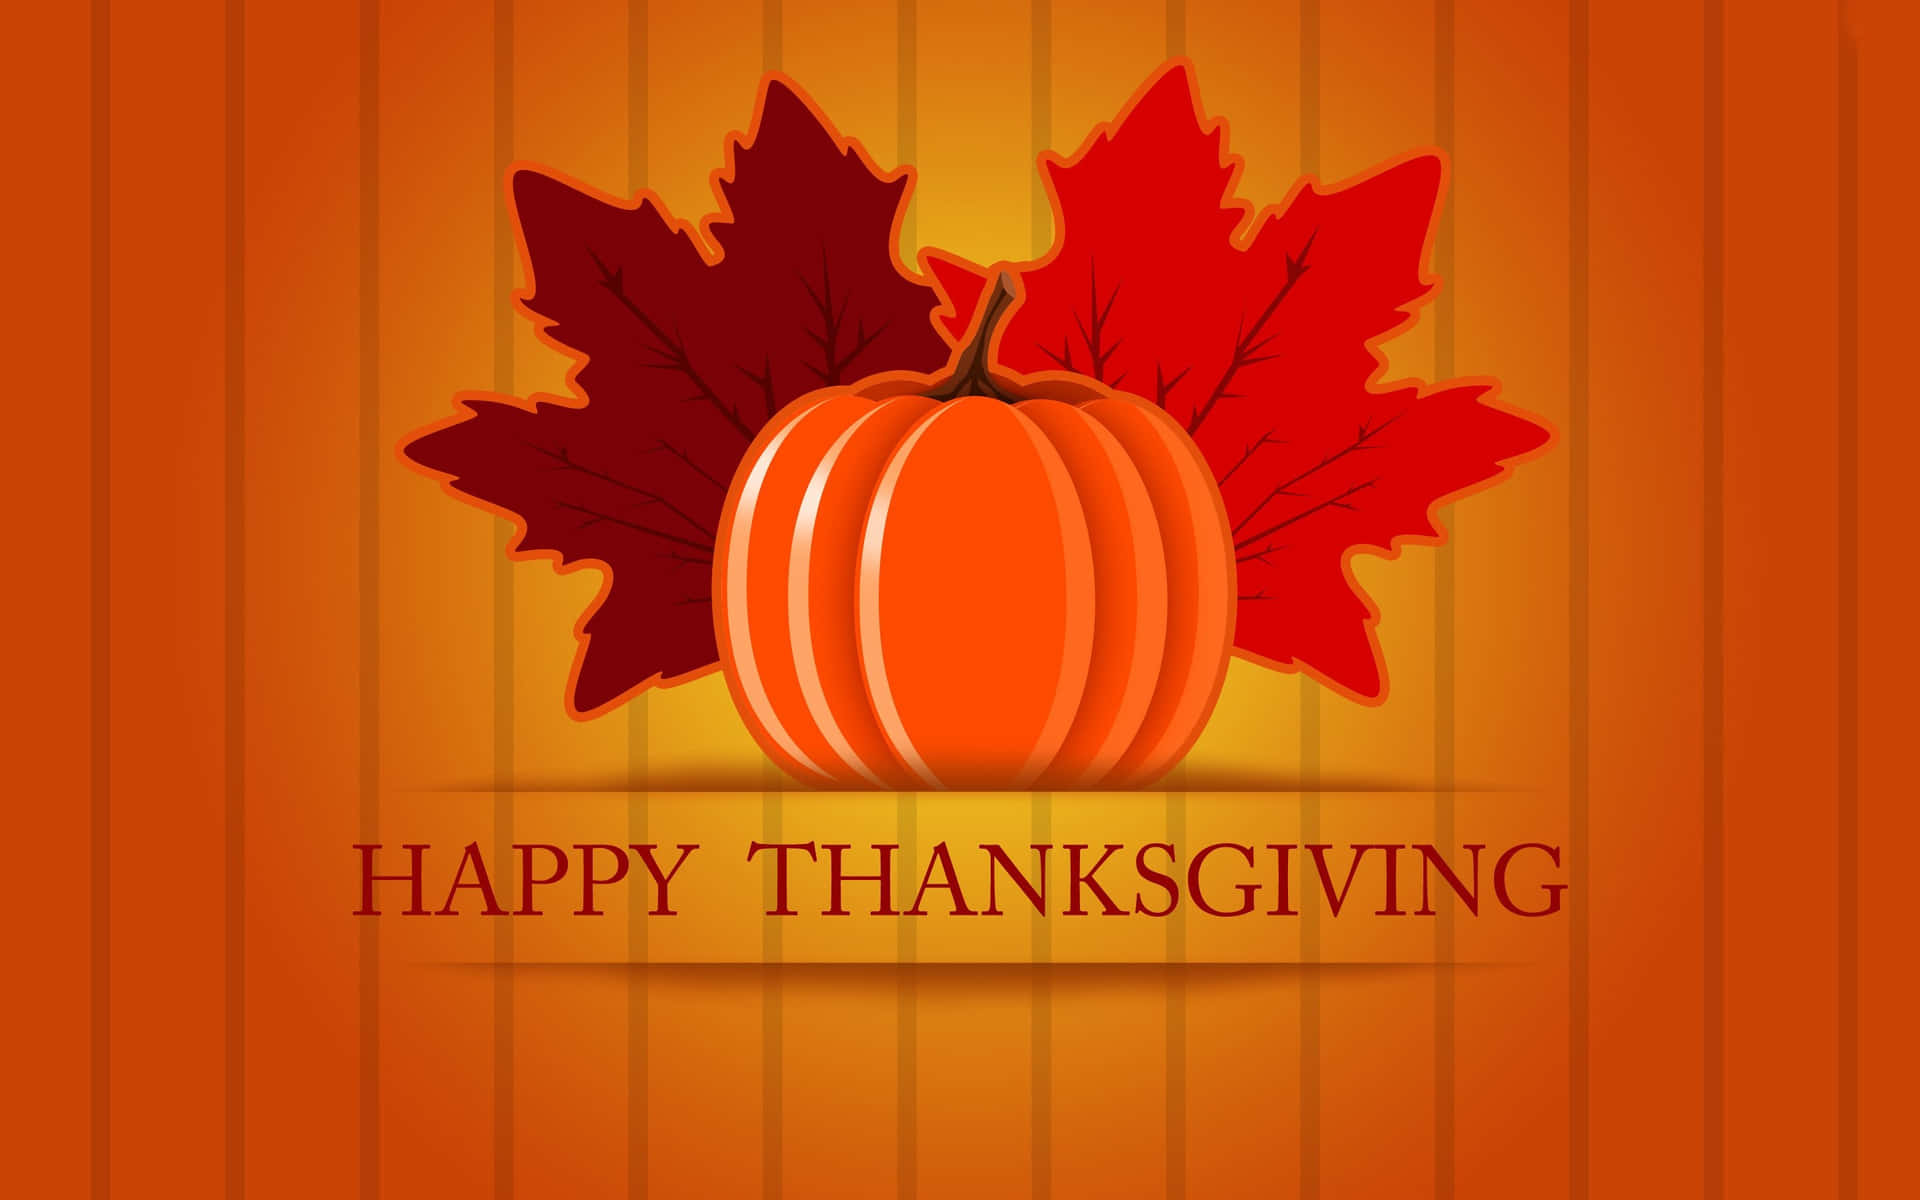 Pumpkin Against Two Maple Leaves Happy Thanksgiving Greeting Background